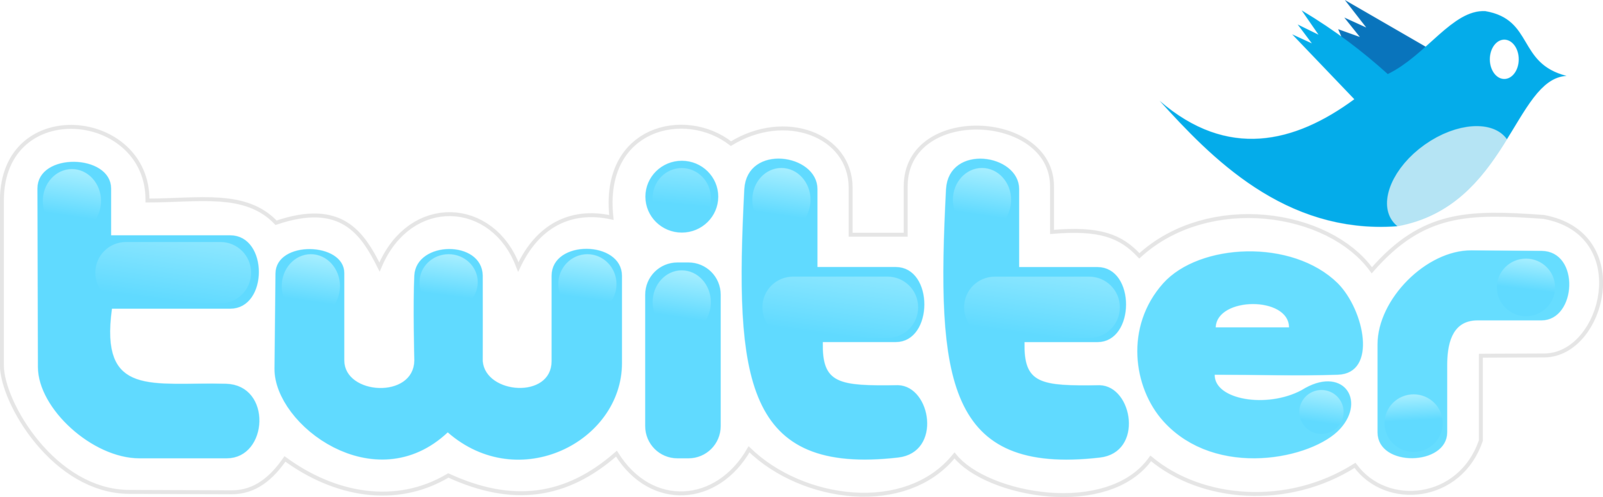 Twitter Png Logo Jpg Transparent - Twitter Logo And Name Png (1603x497), Png Download